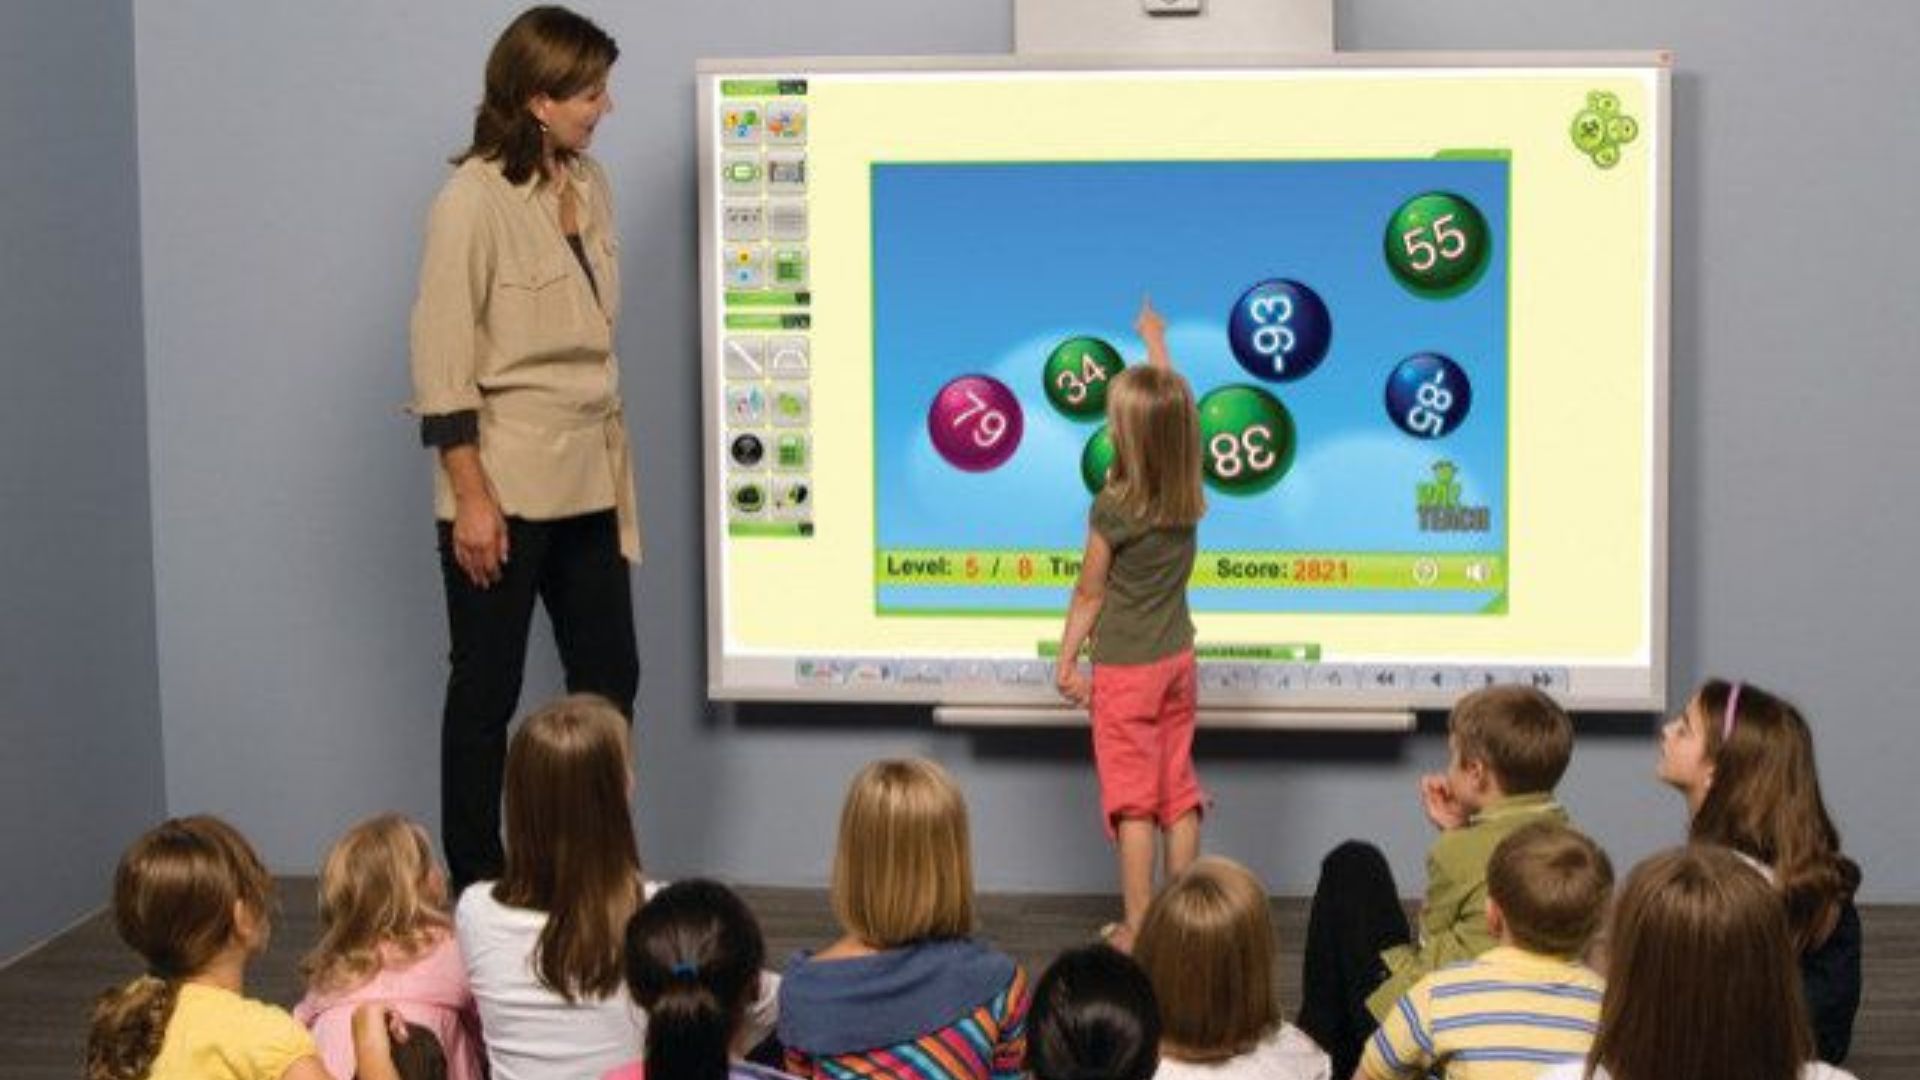 Teacher and students work on interactive flat panel display in classroom